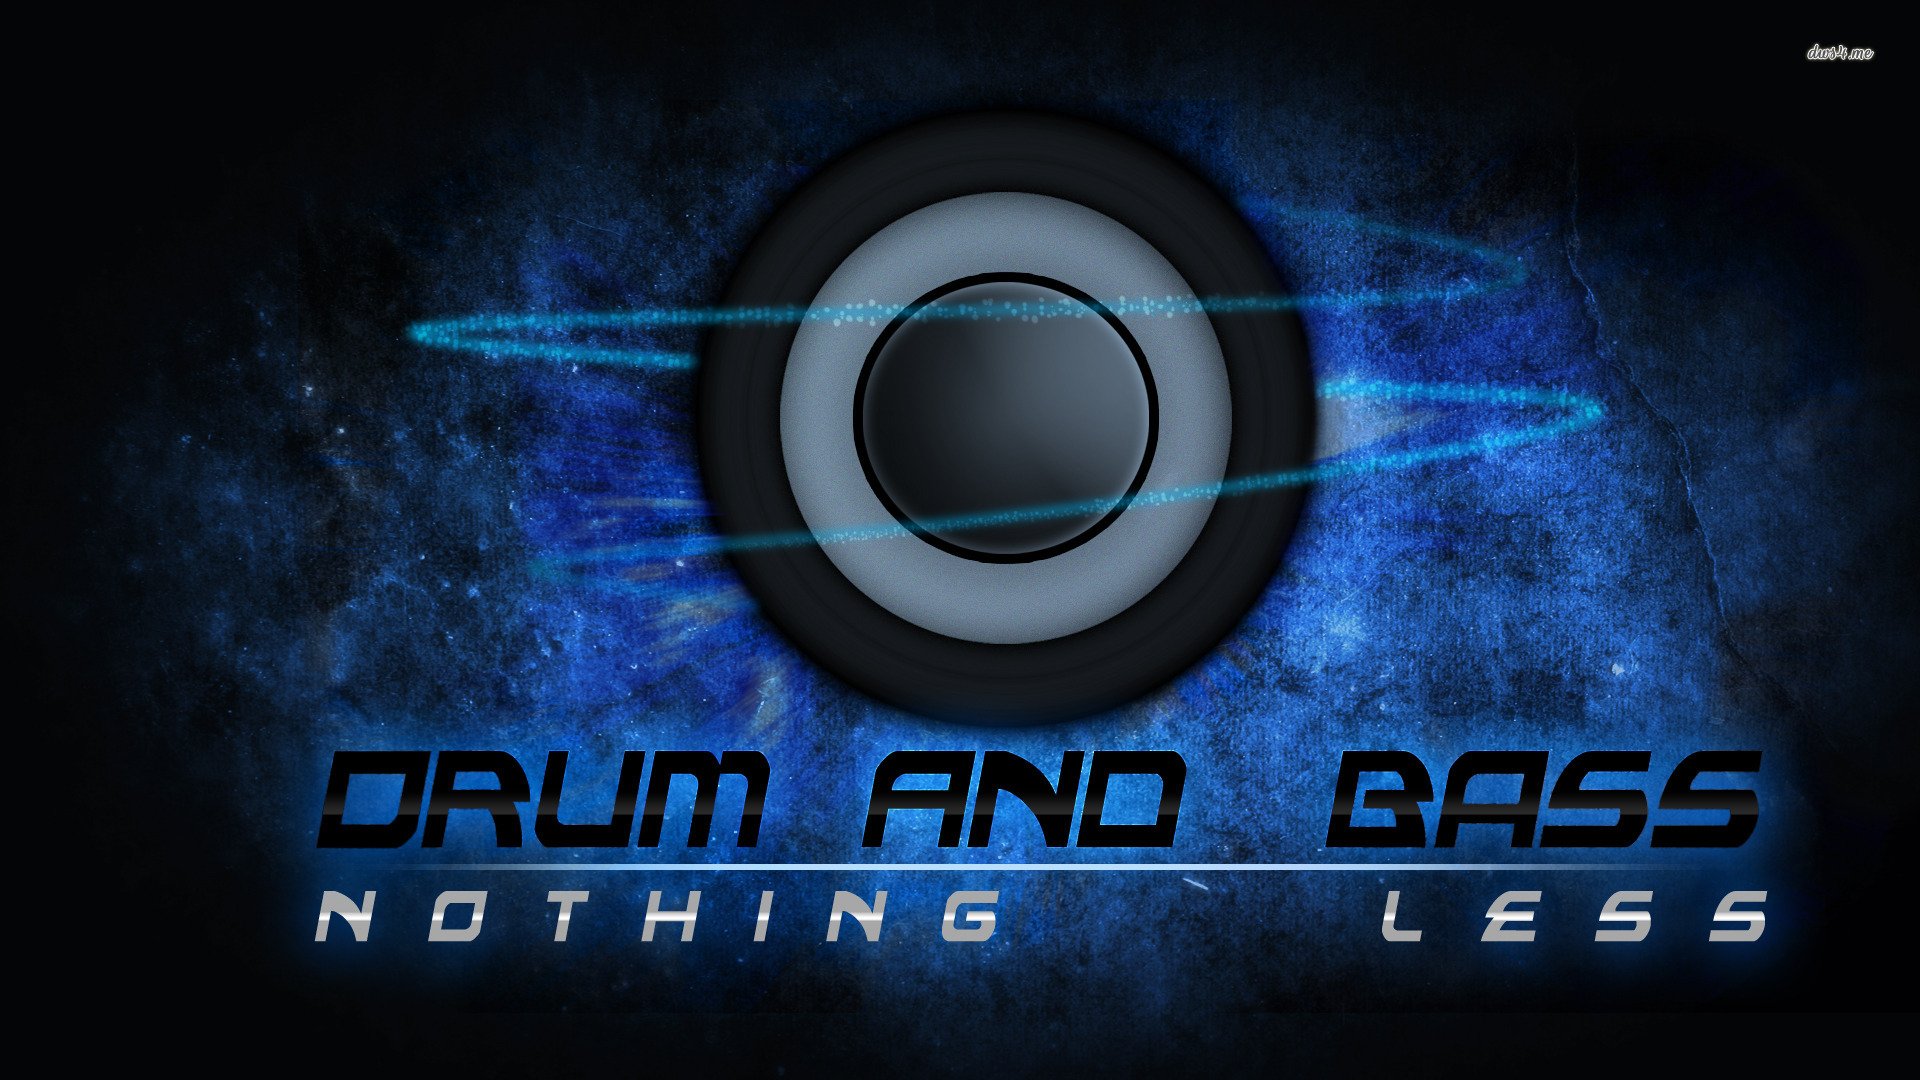 Drum And Bass Wallpaper X